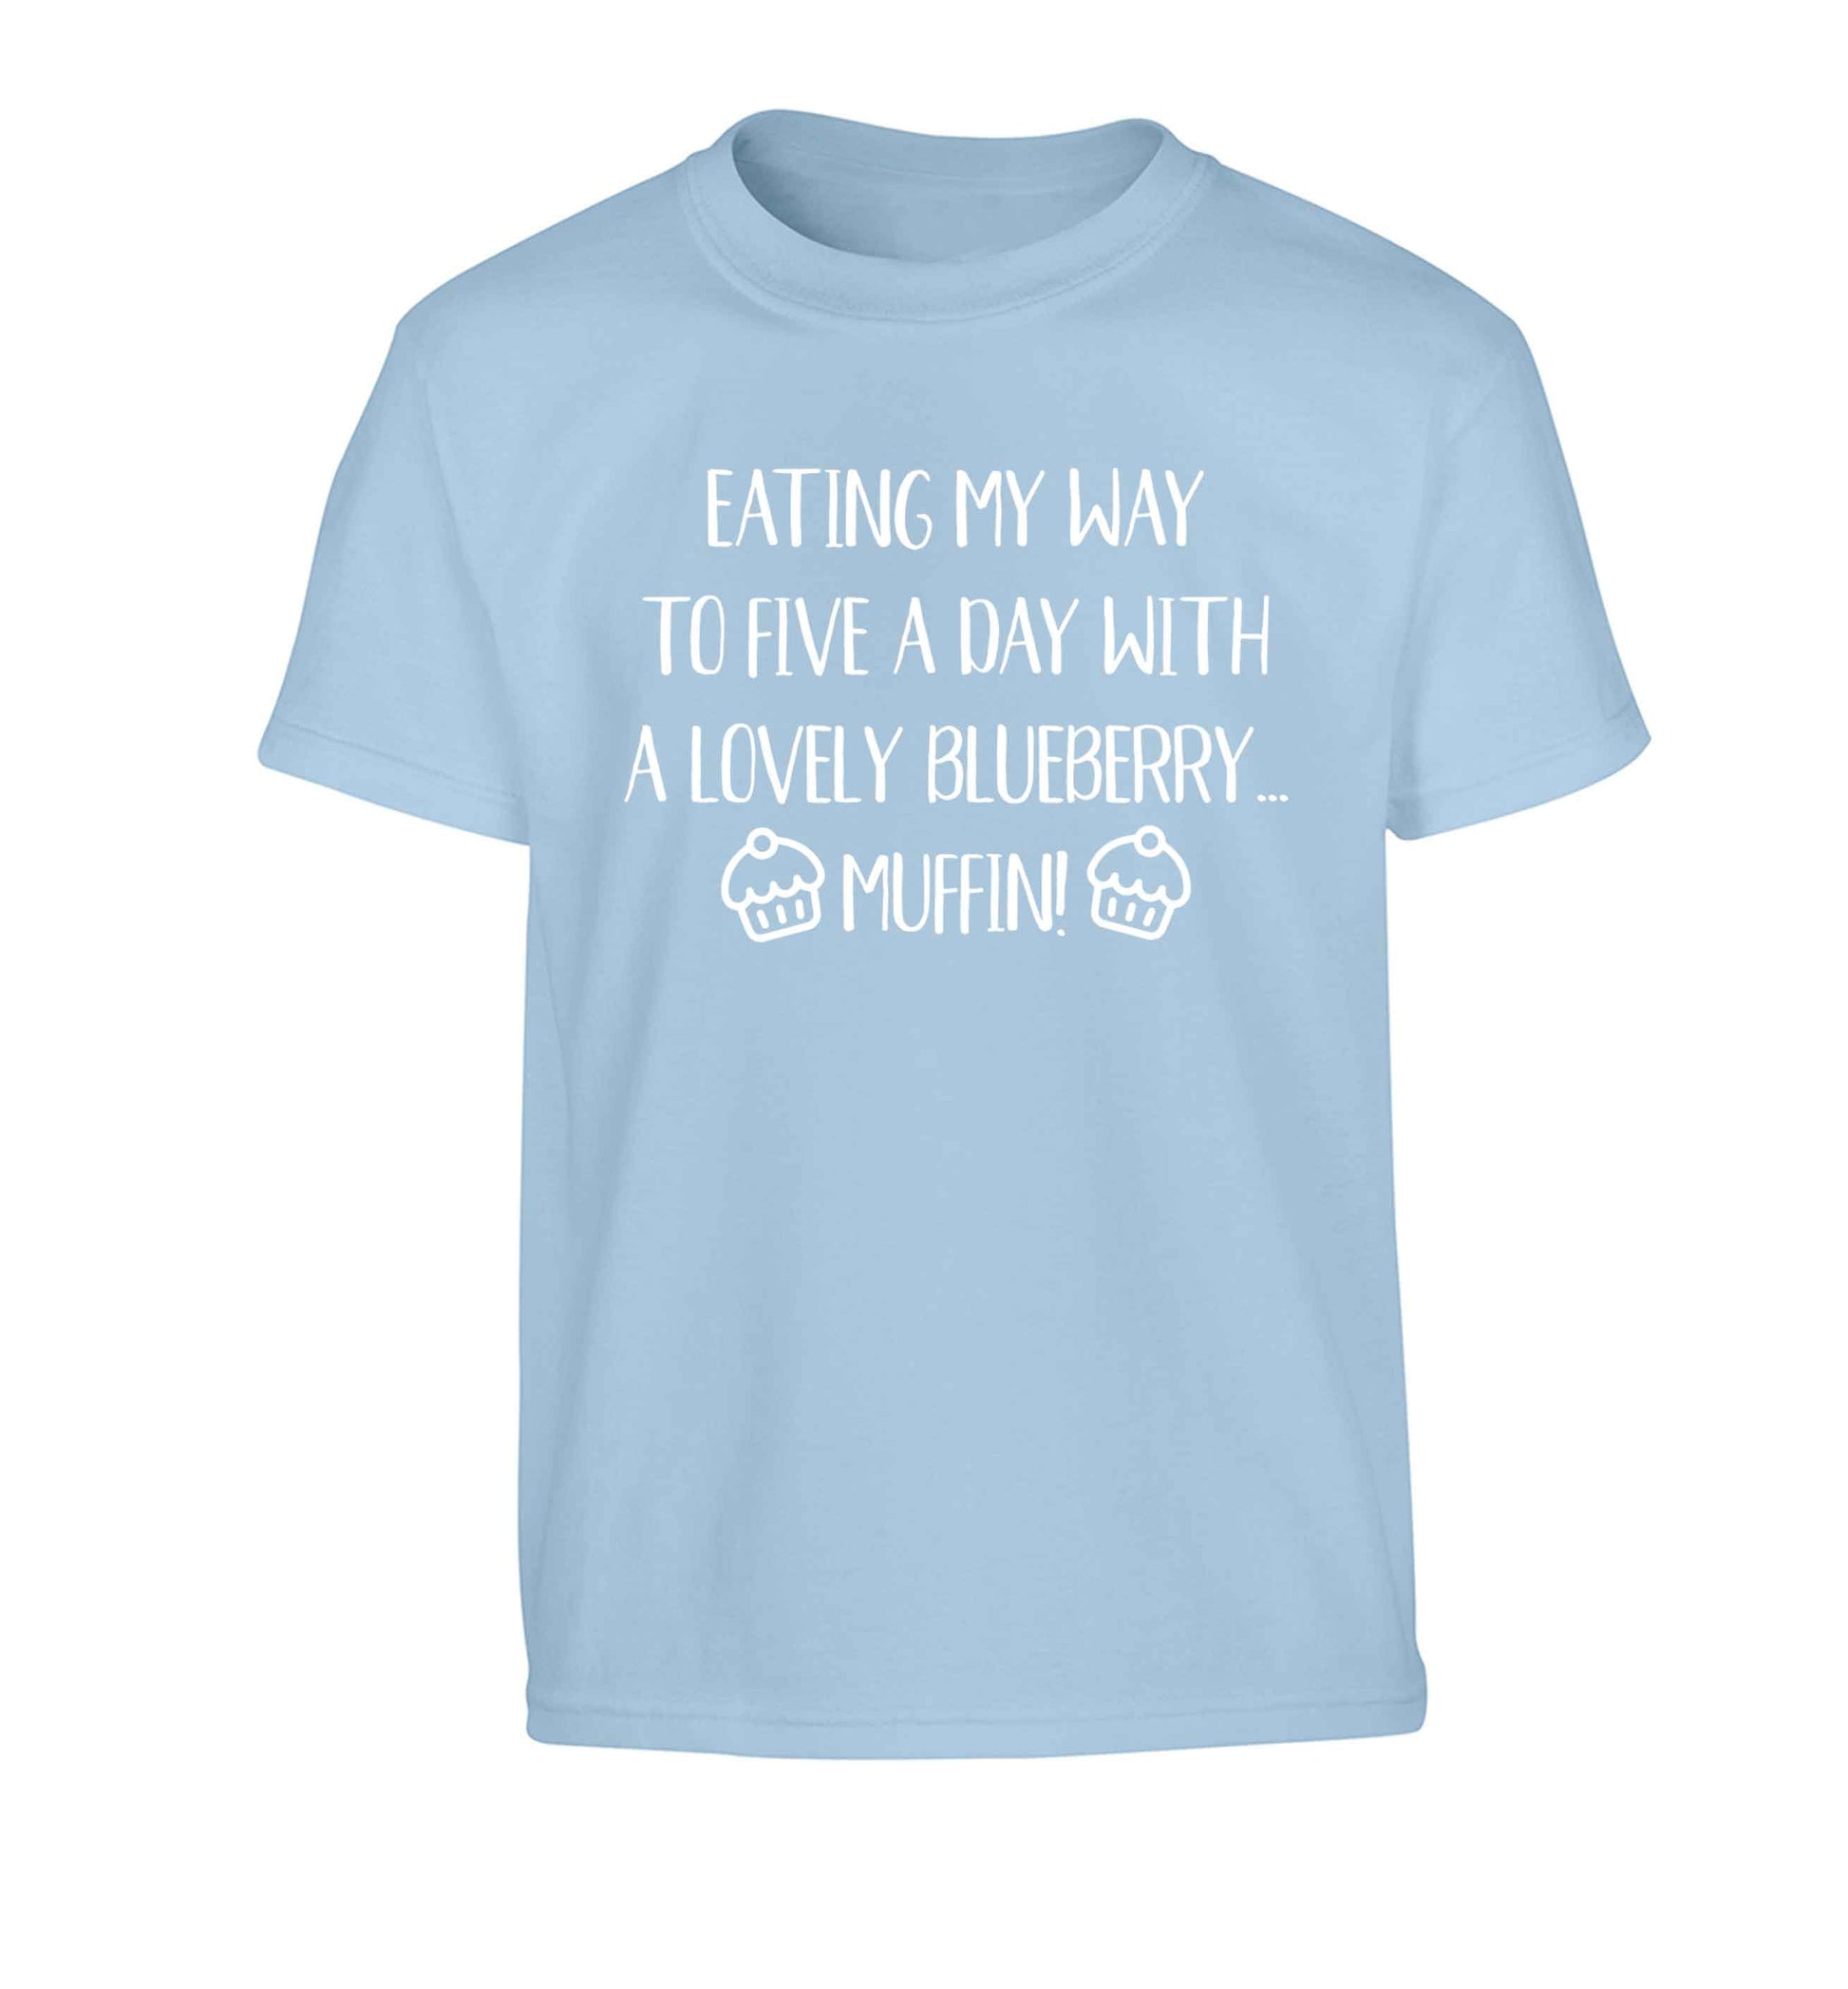 Eating my way to five a day with a lovely blueberry muffin Children's light blue Tshirt 12-13 Years